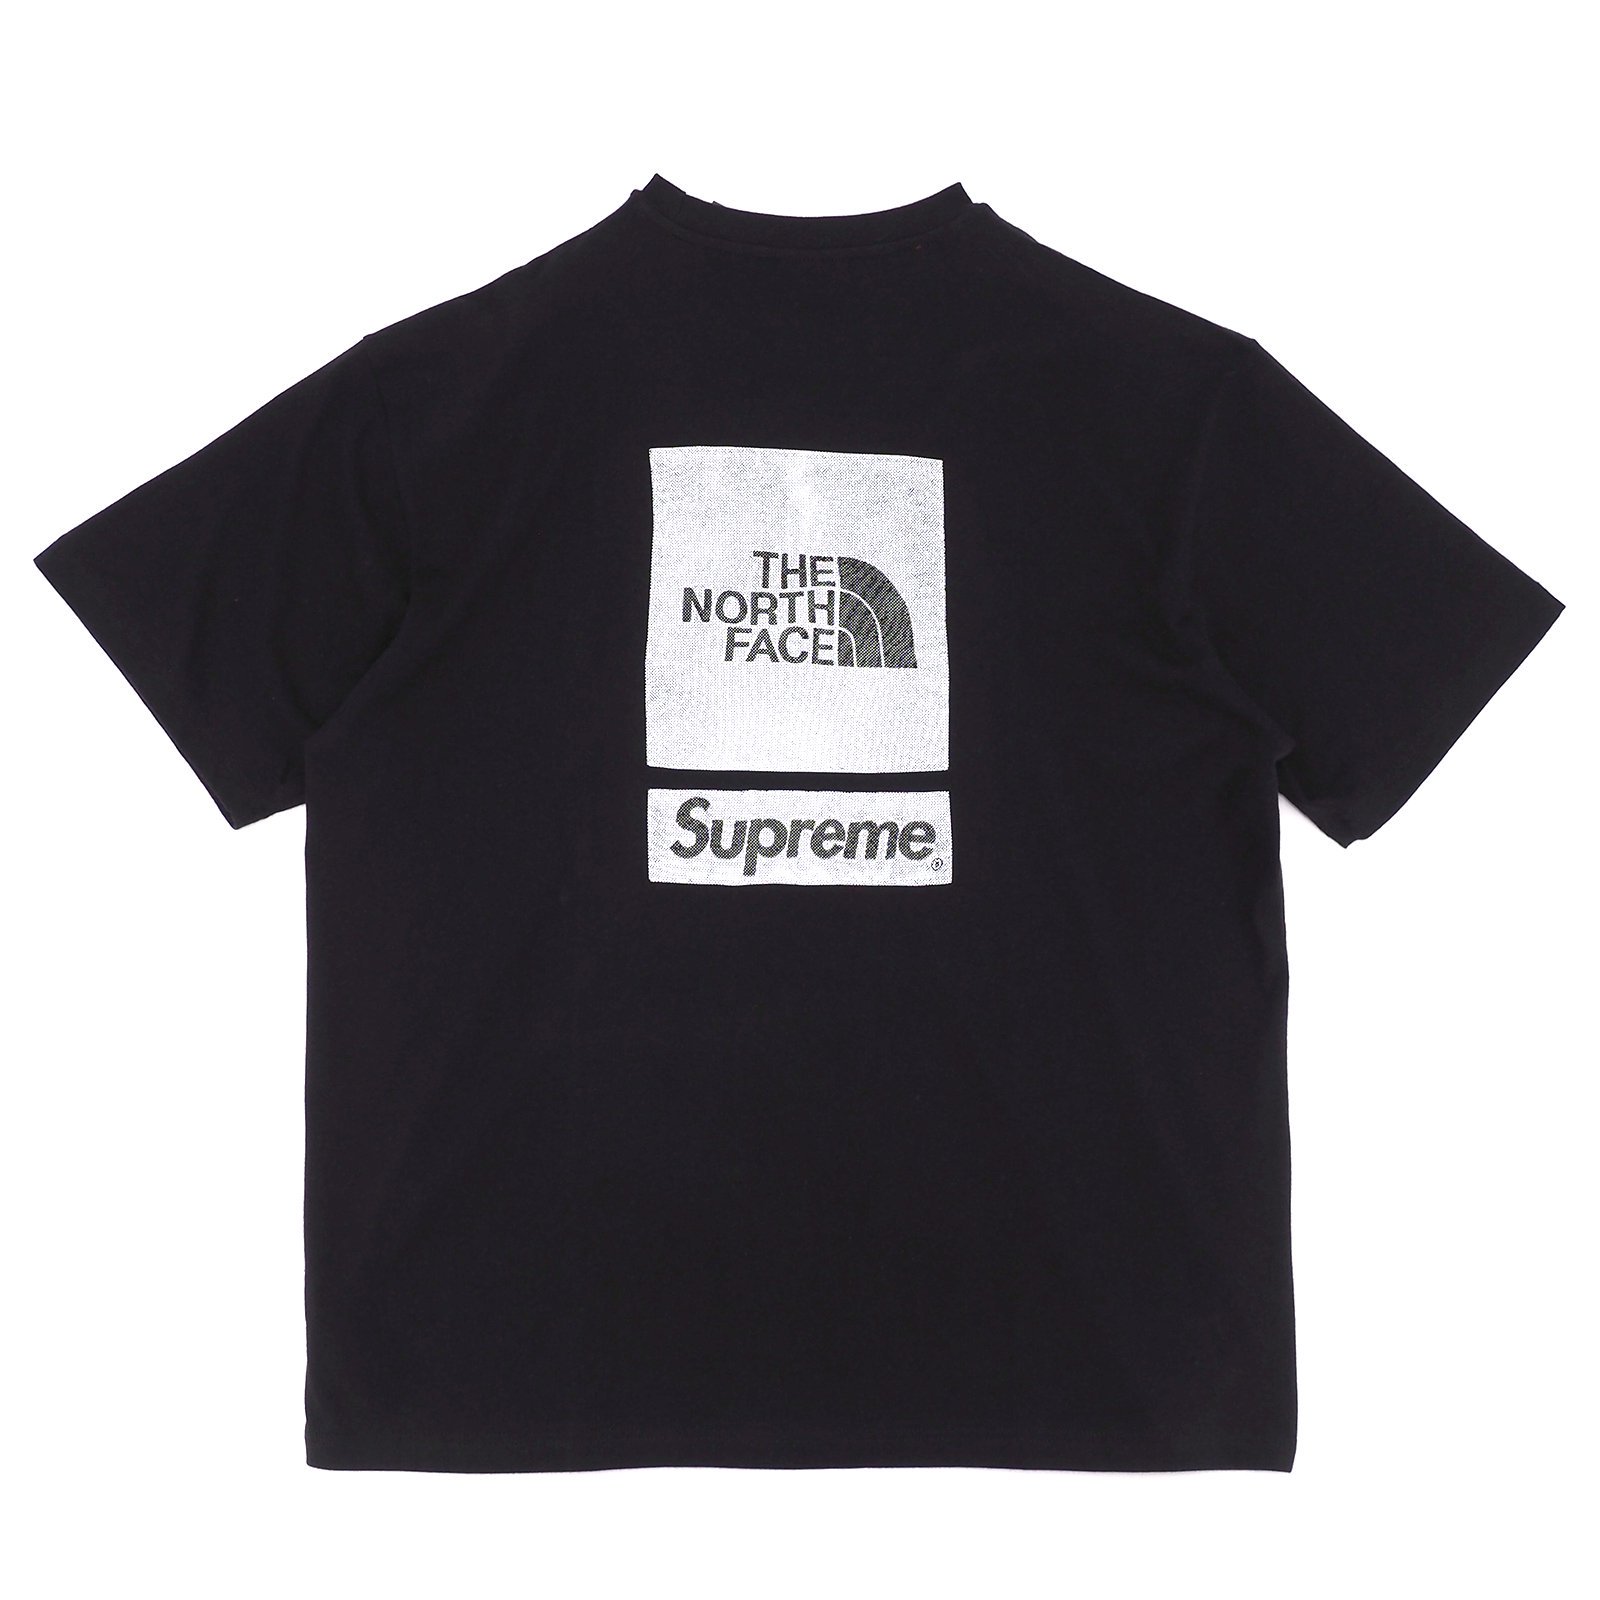 steeptechf⭐️正規品 THE NORTH FACE×supremeコラボ サイズS